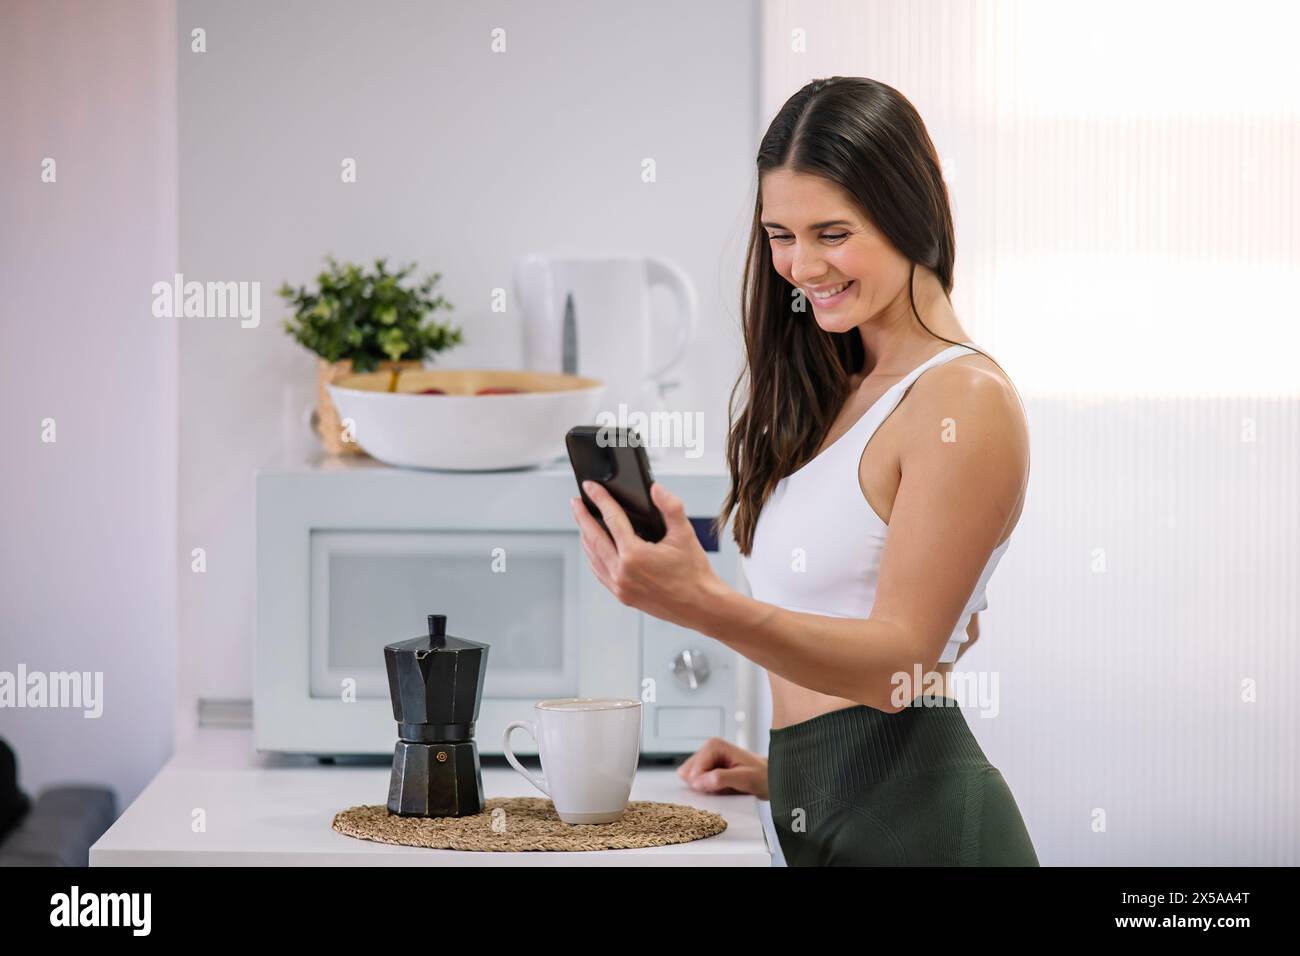 A fit woman in activewear smiles while using her smartphone in a modern kitchen Stock Photo